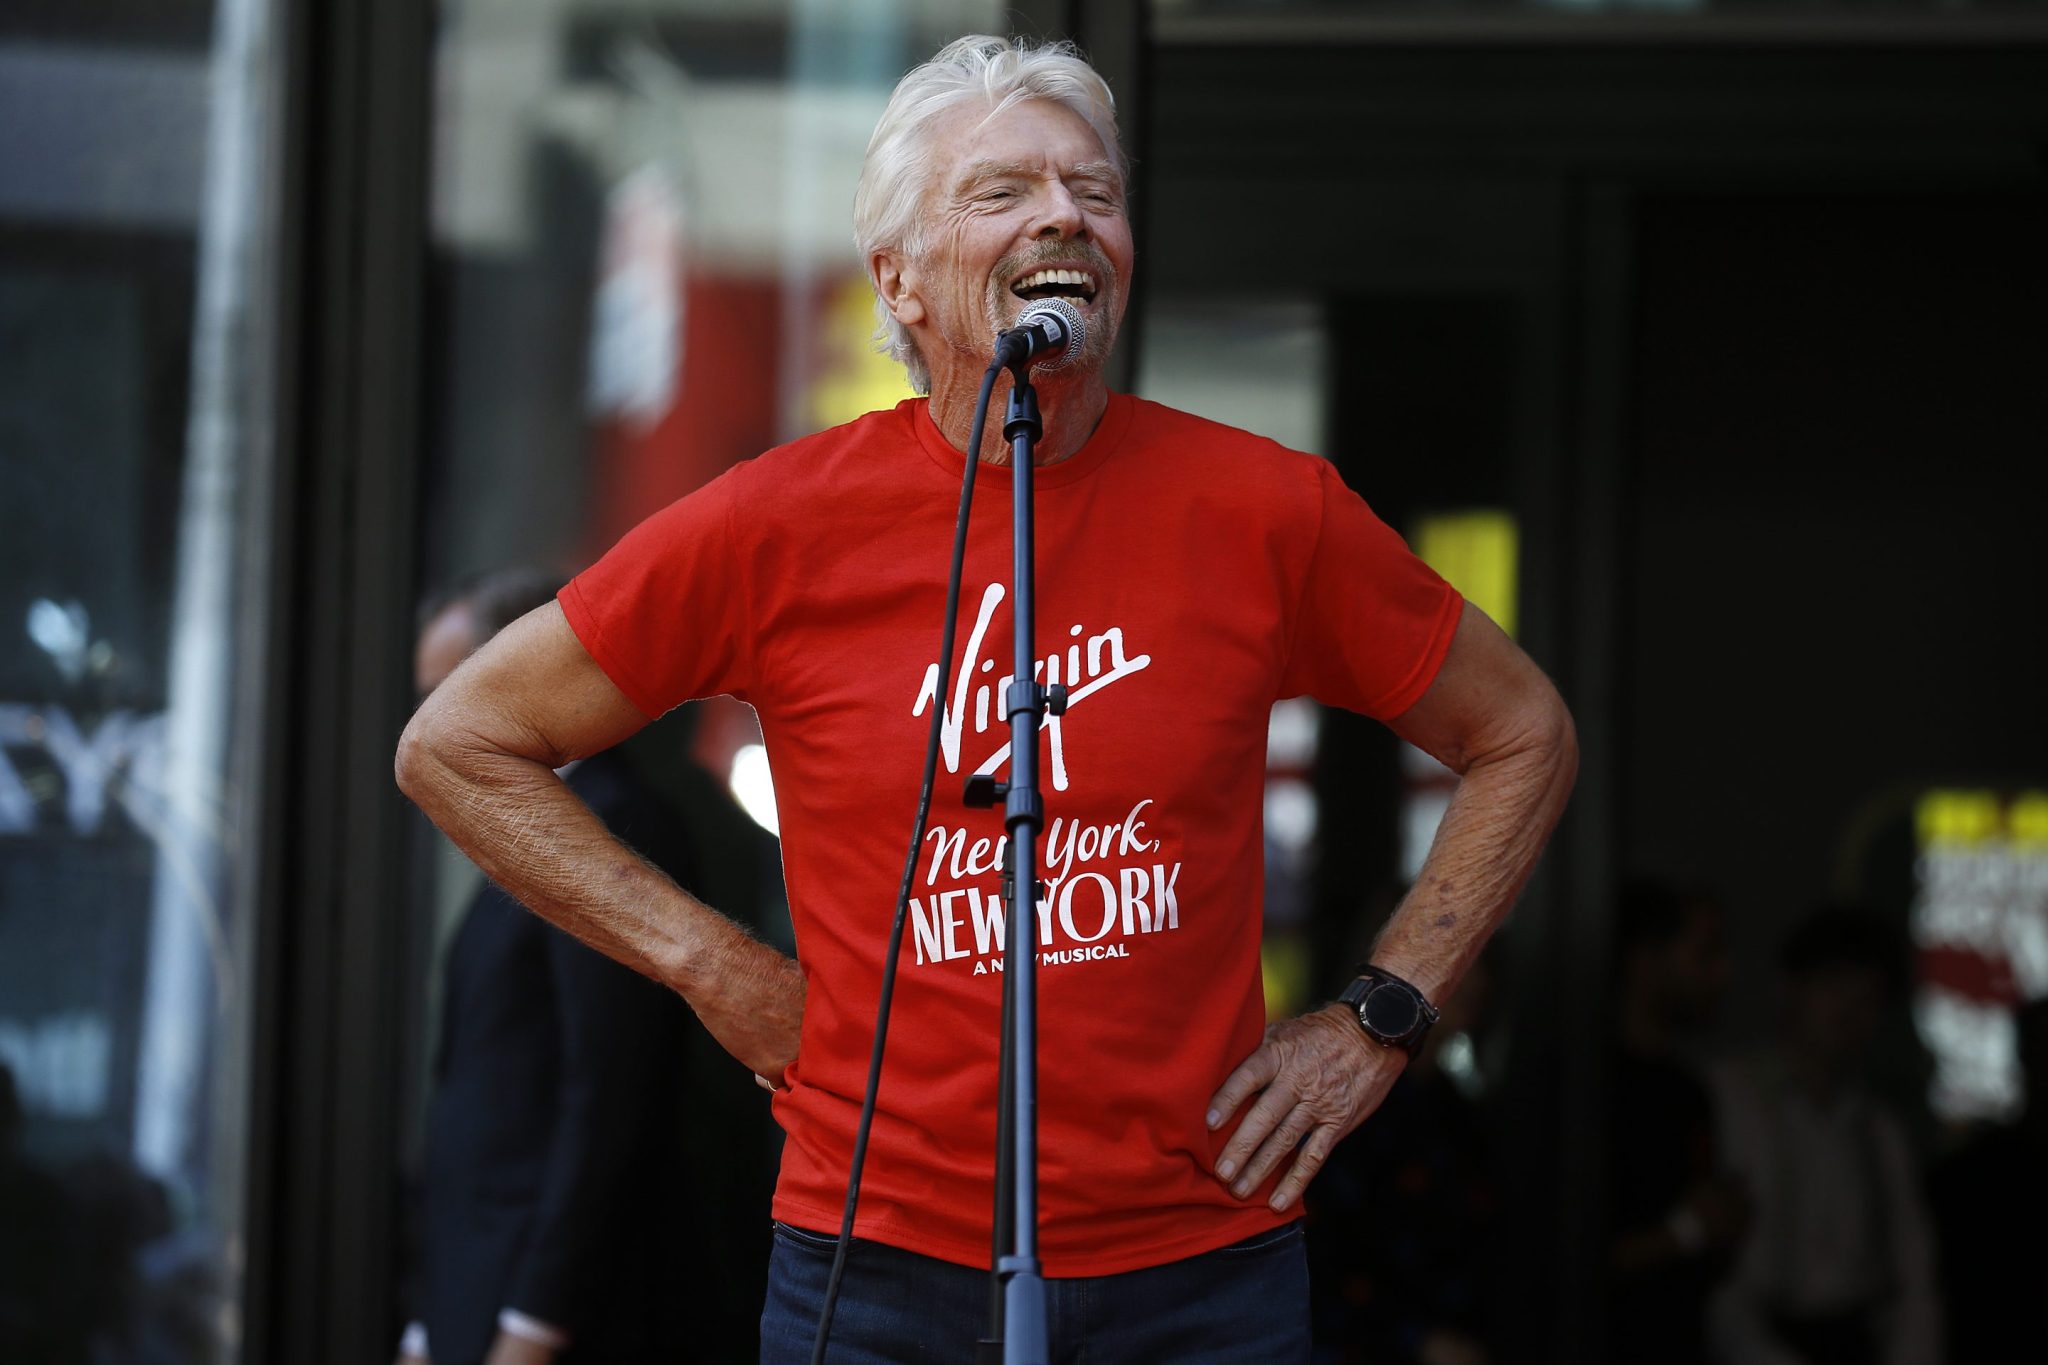 richard branson says it’s ‘very sad’ when people measure wealth as success and finds being called a billionaire ‘insulting’